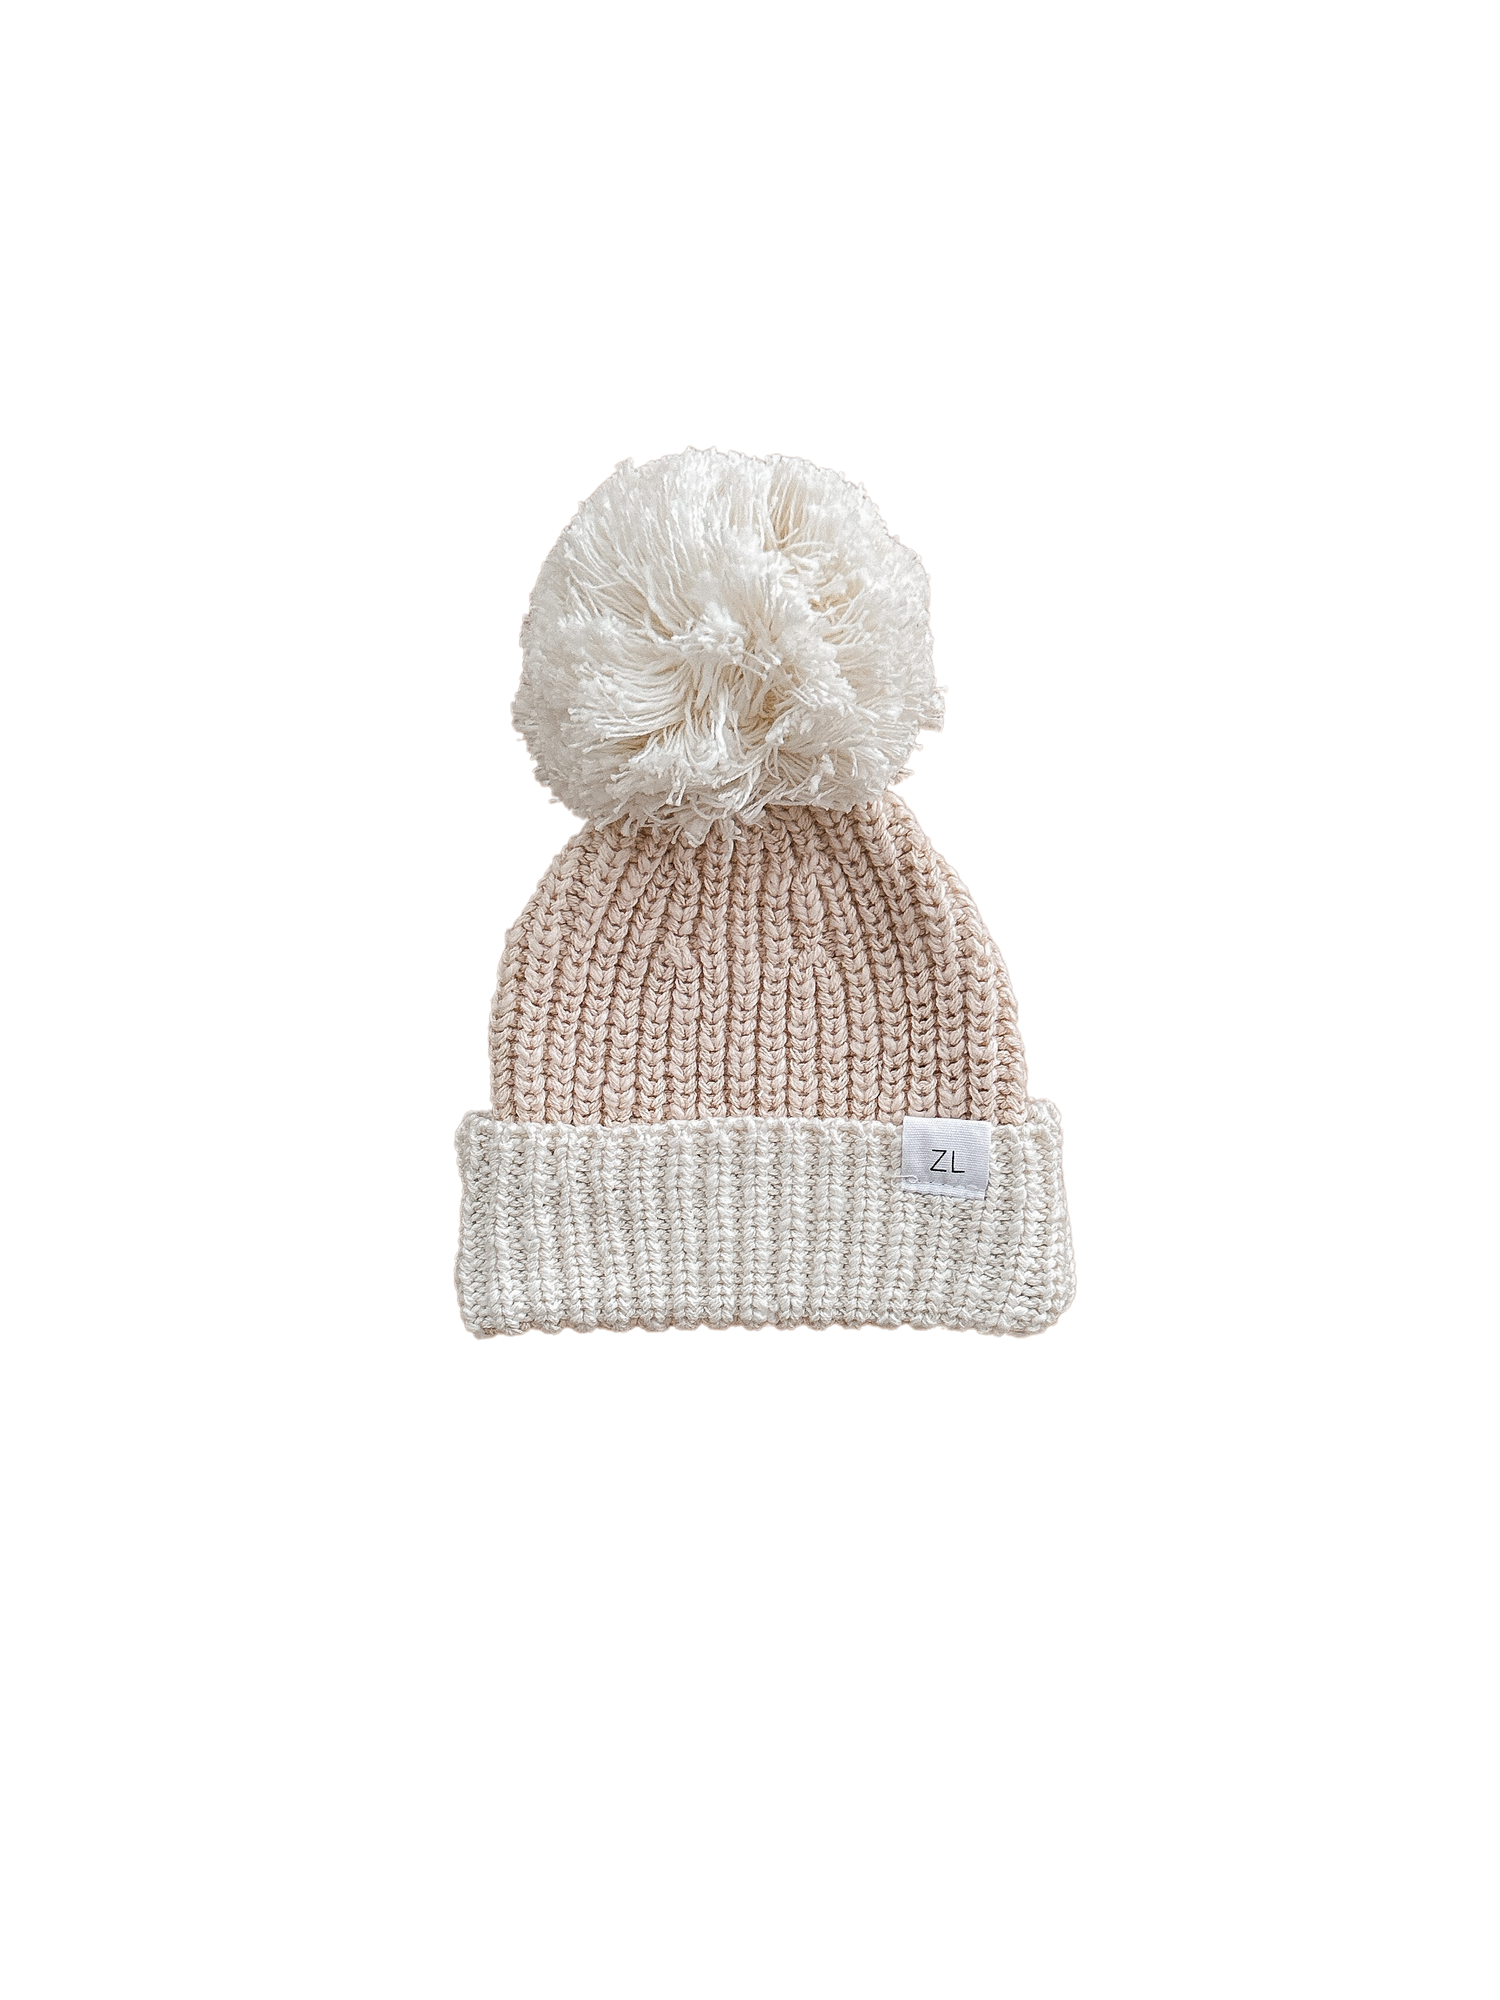 By Ziggy Lou - 100% cotton baby clothing. Featuring two tone petal beanie with pom pom.